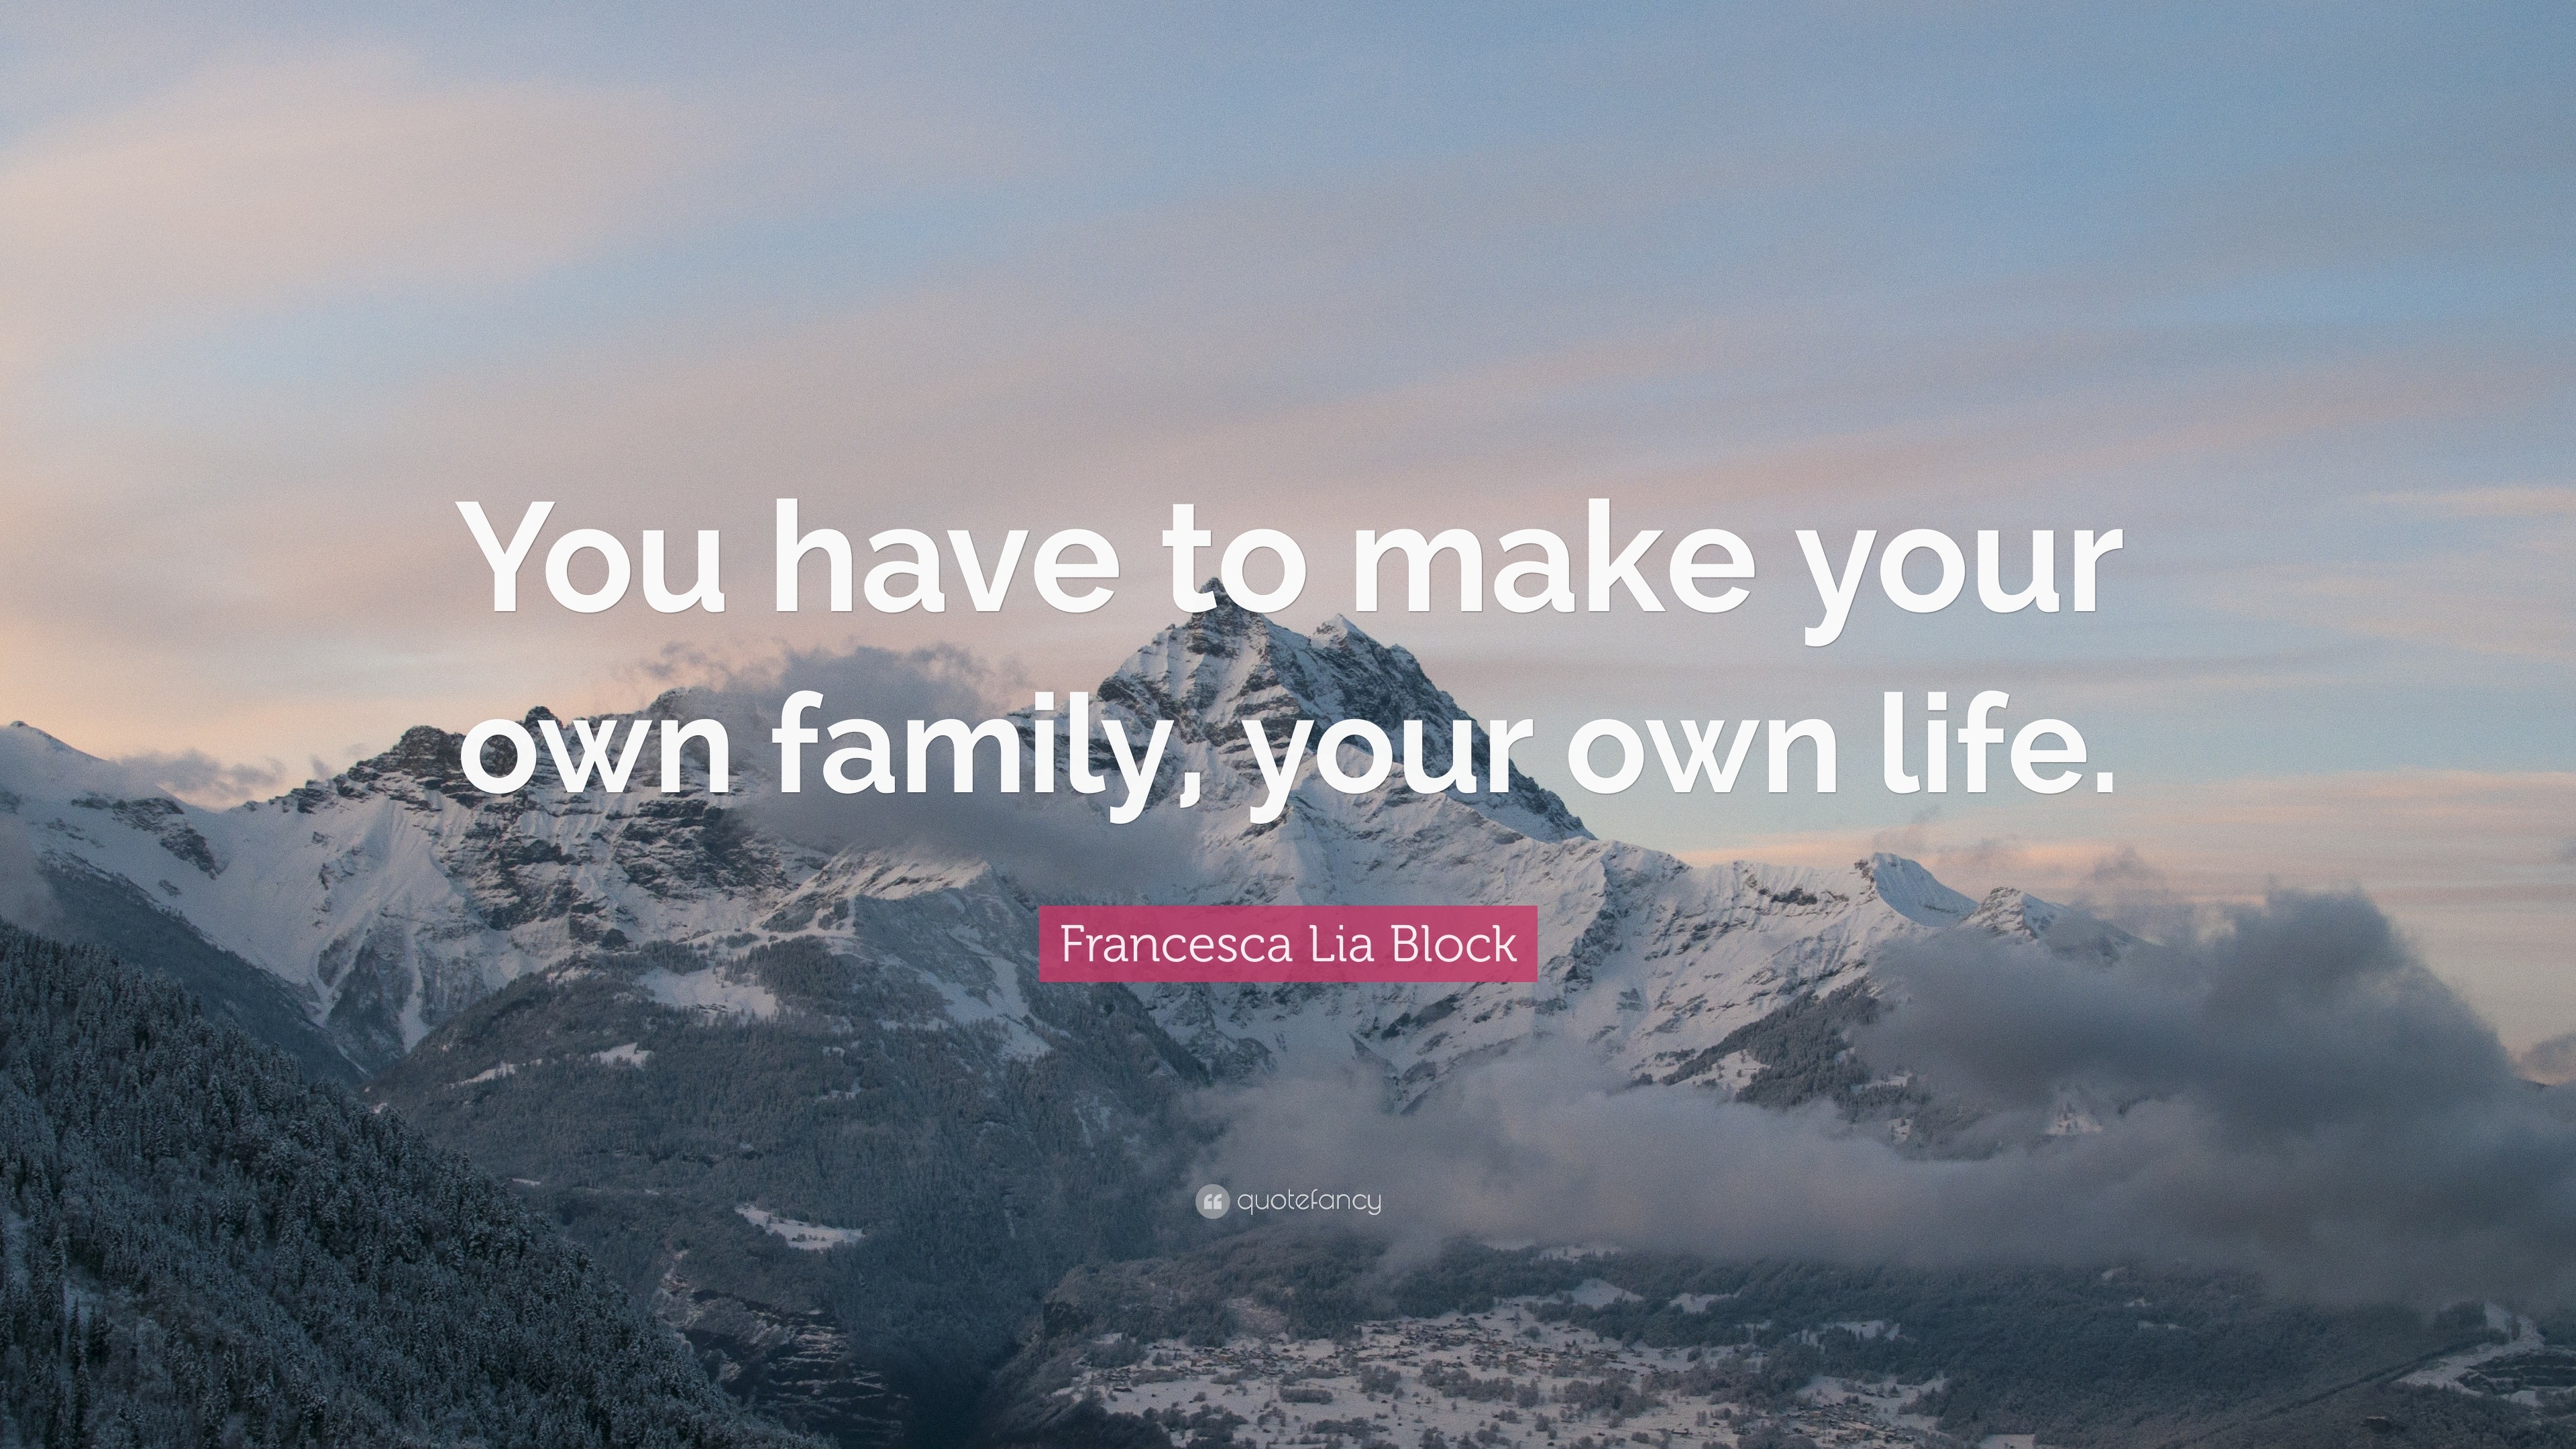 Francesca Lia Block Quote: “You have to make your own family, your own ...